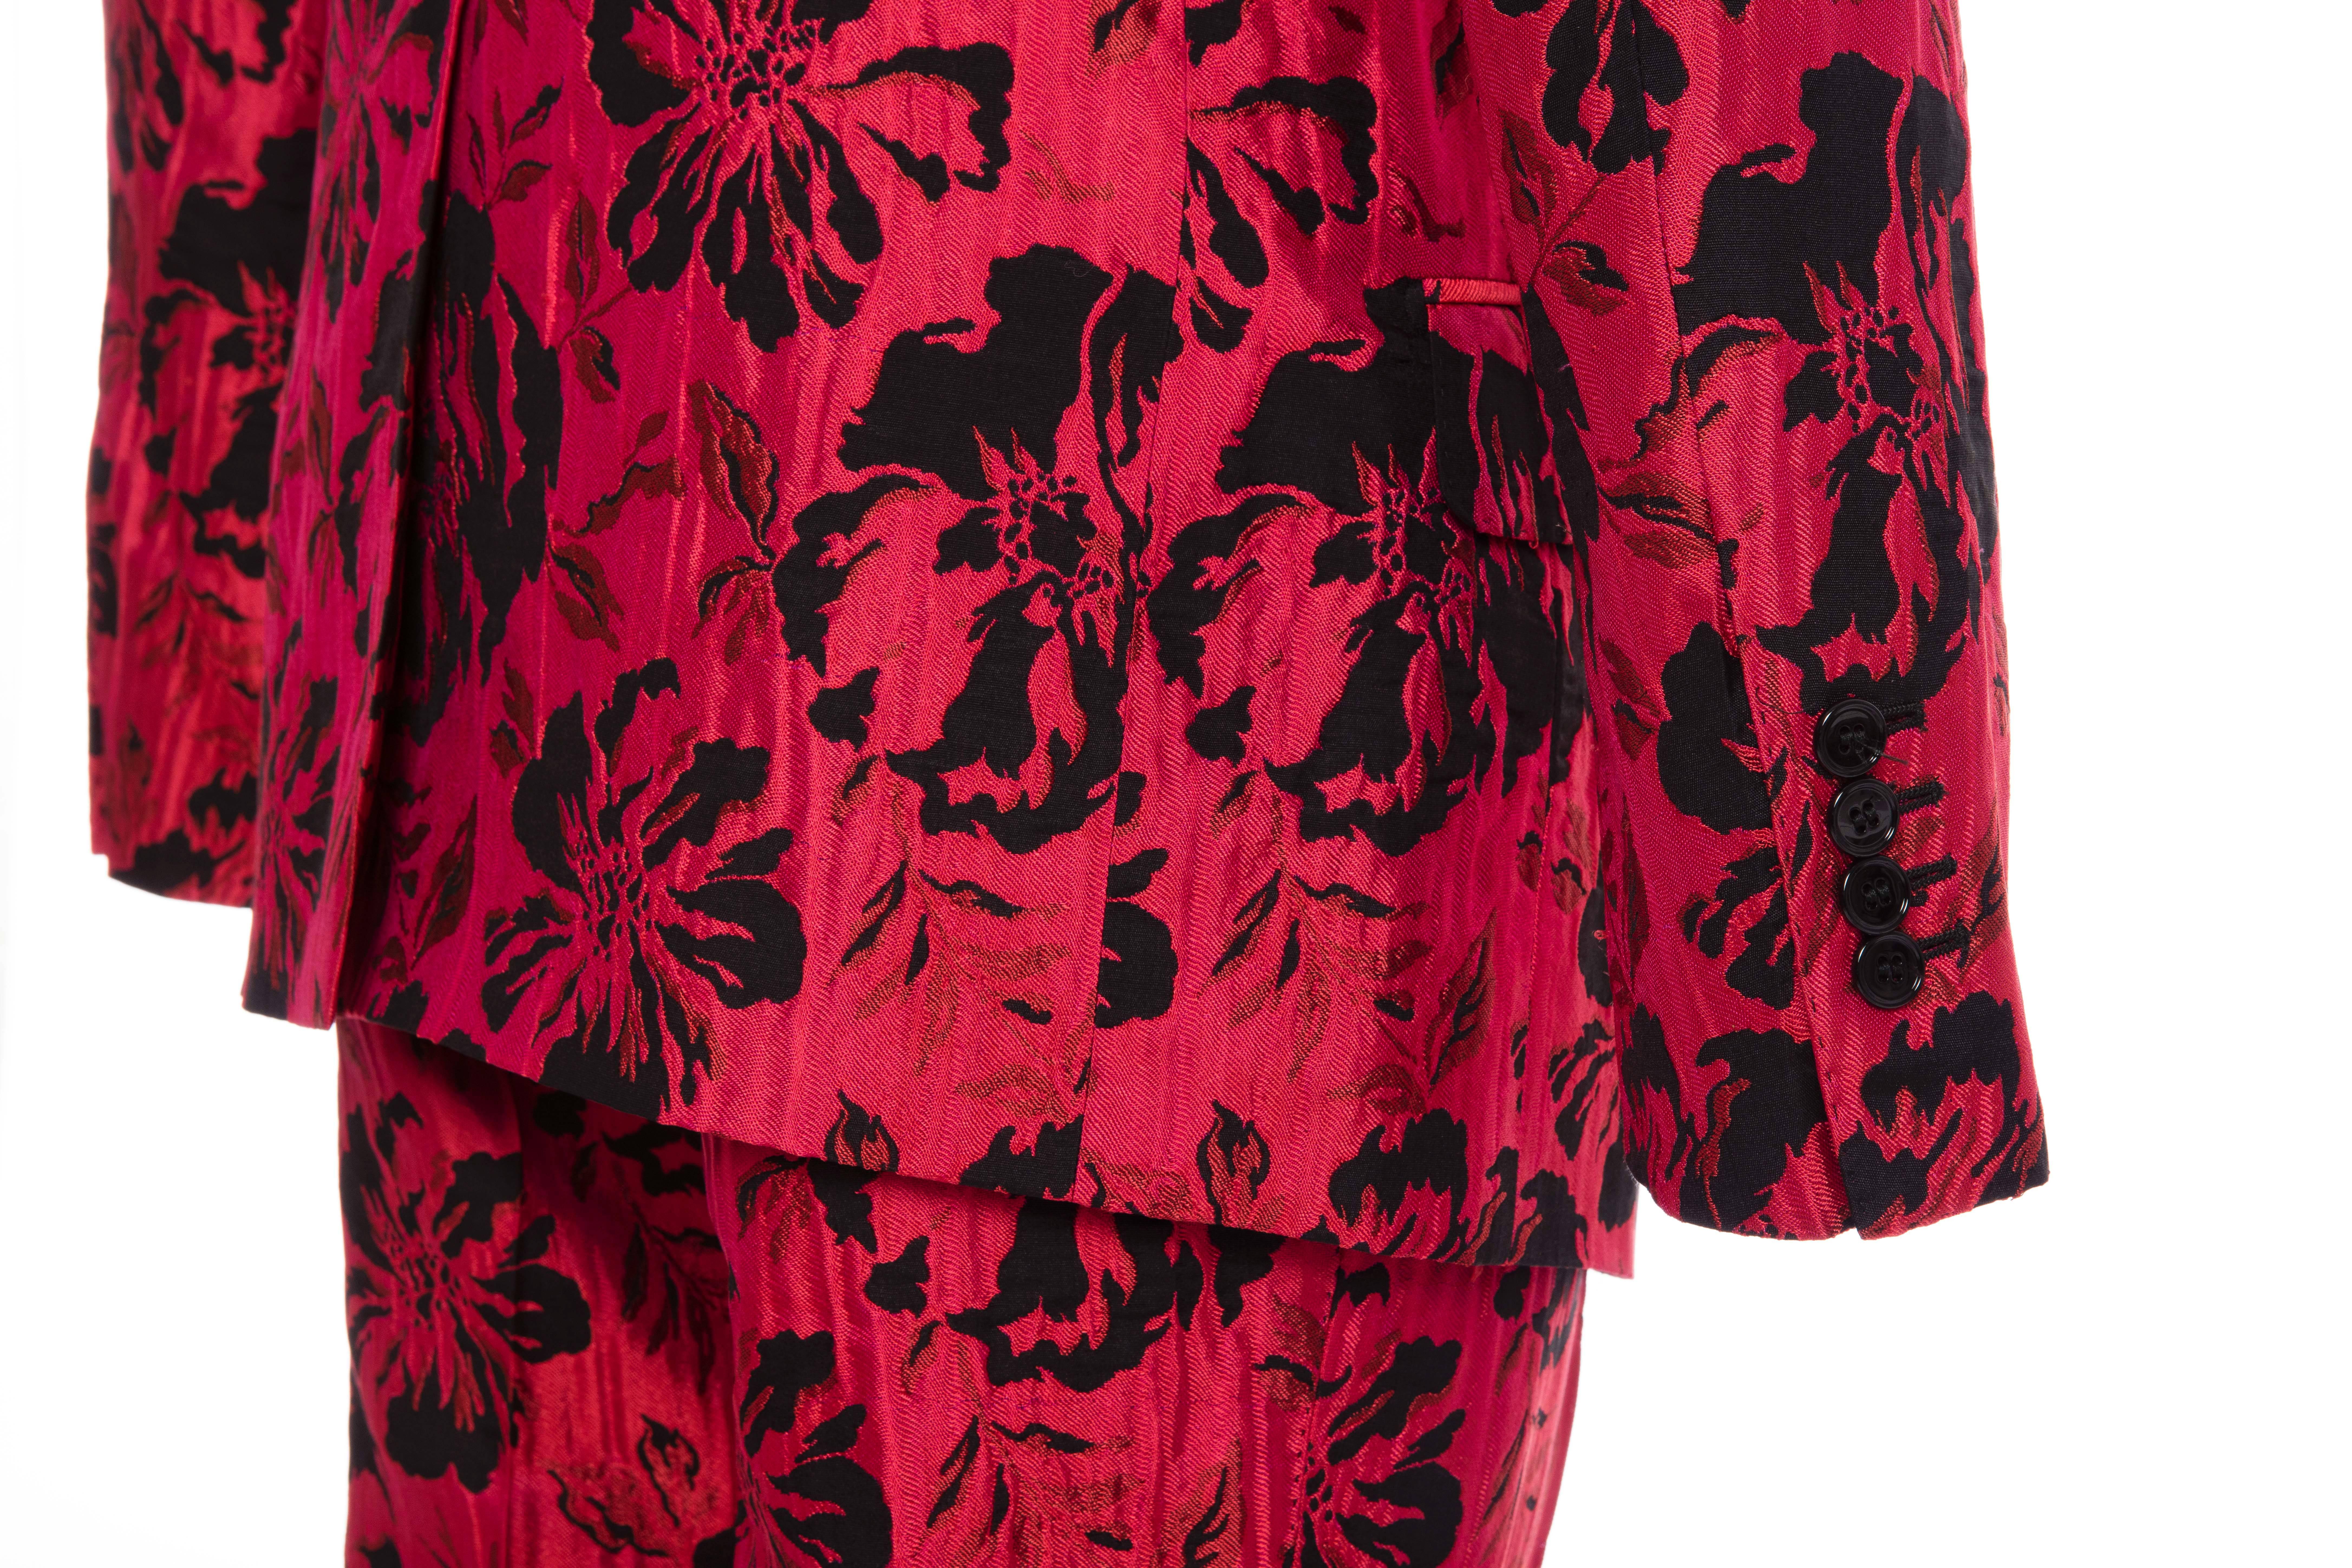 Dolce & Gabbana Men's Runway Red Floral Jacquard Suit, Fall 2011 3